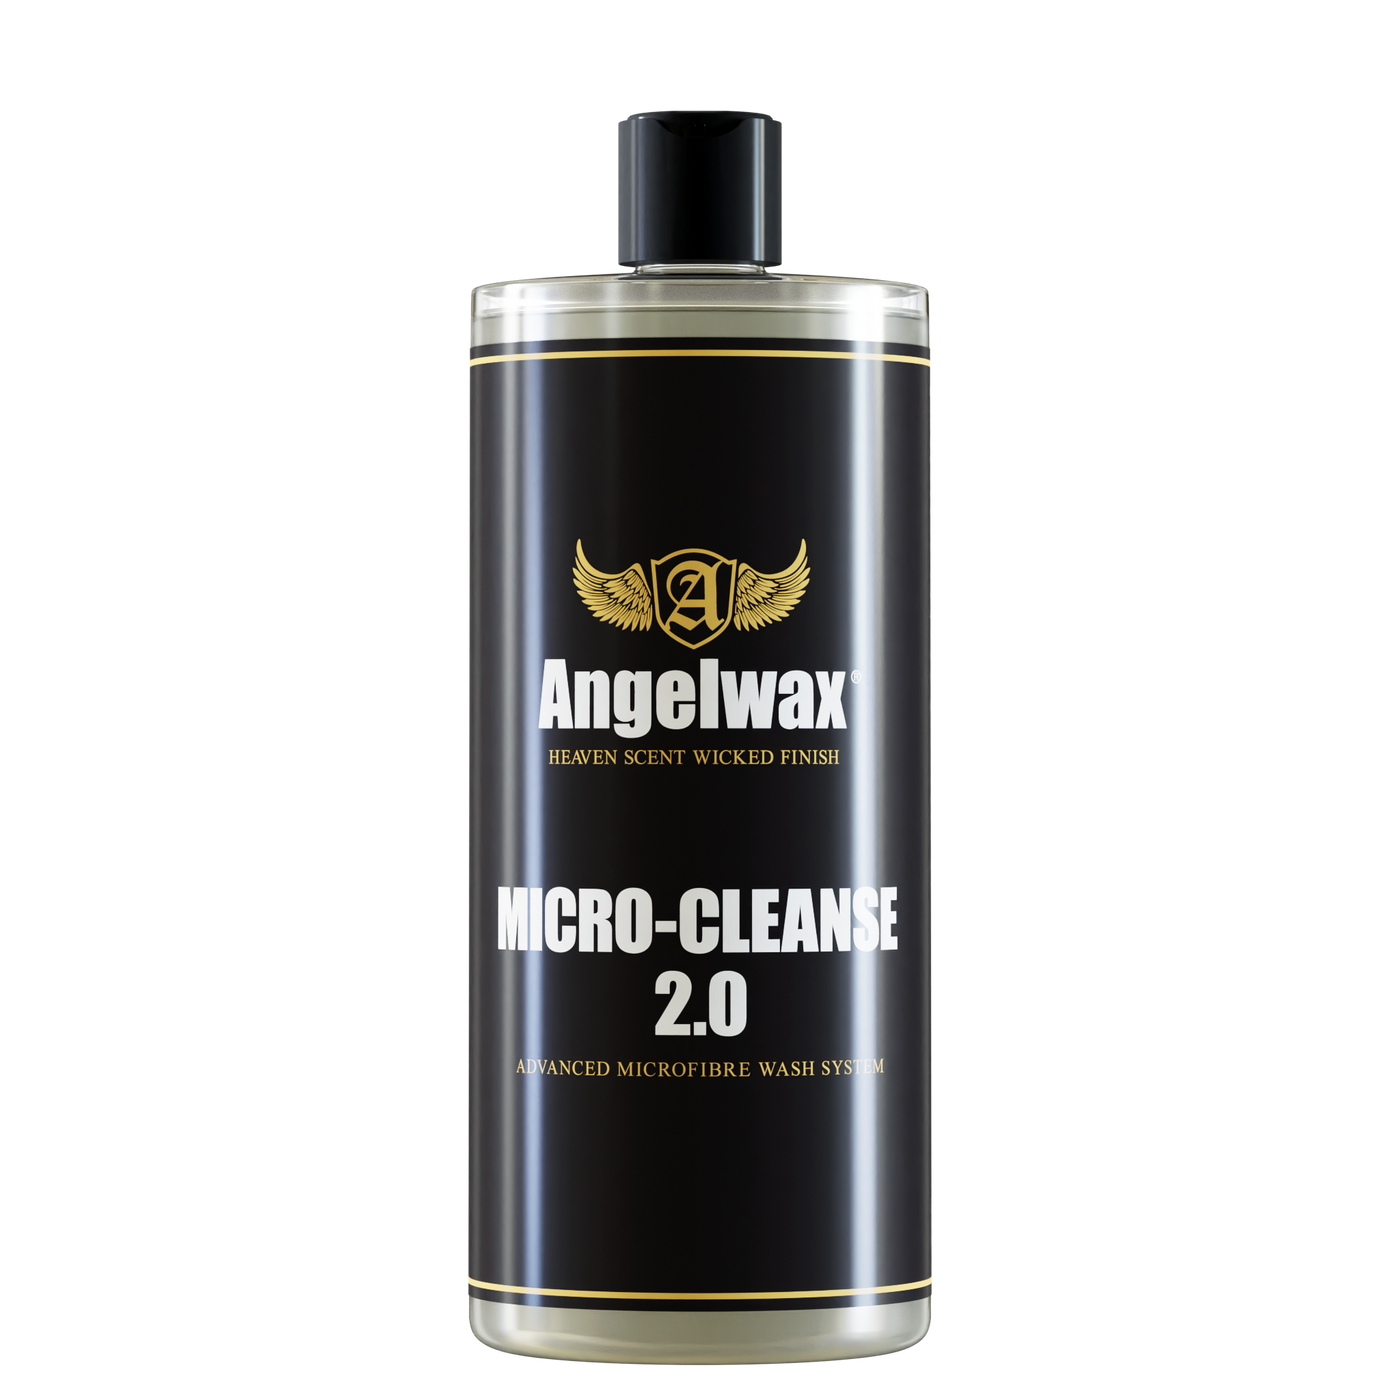 Micro-Cleanse 2.0